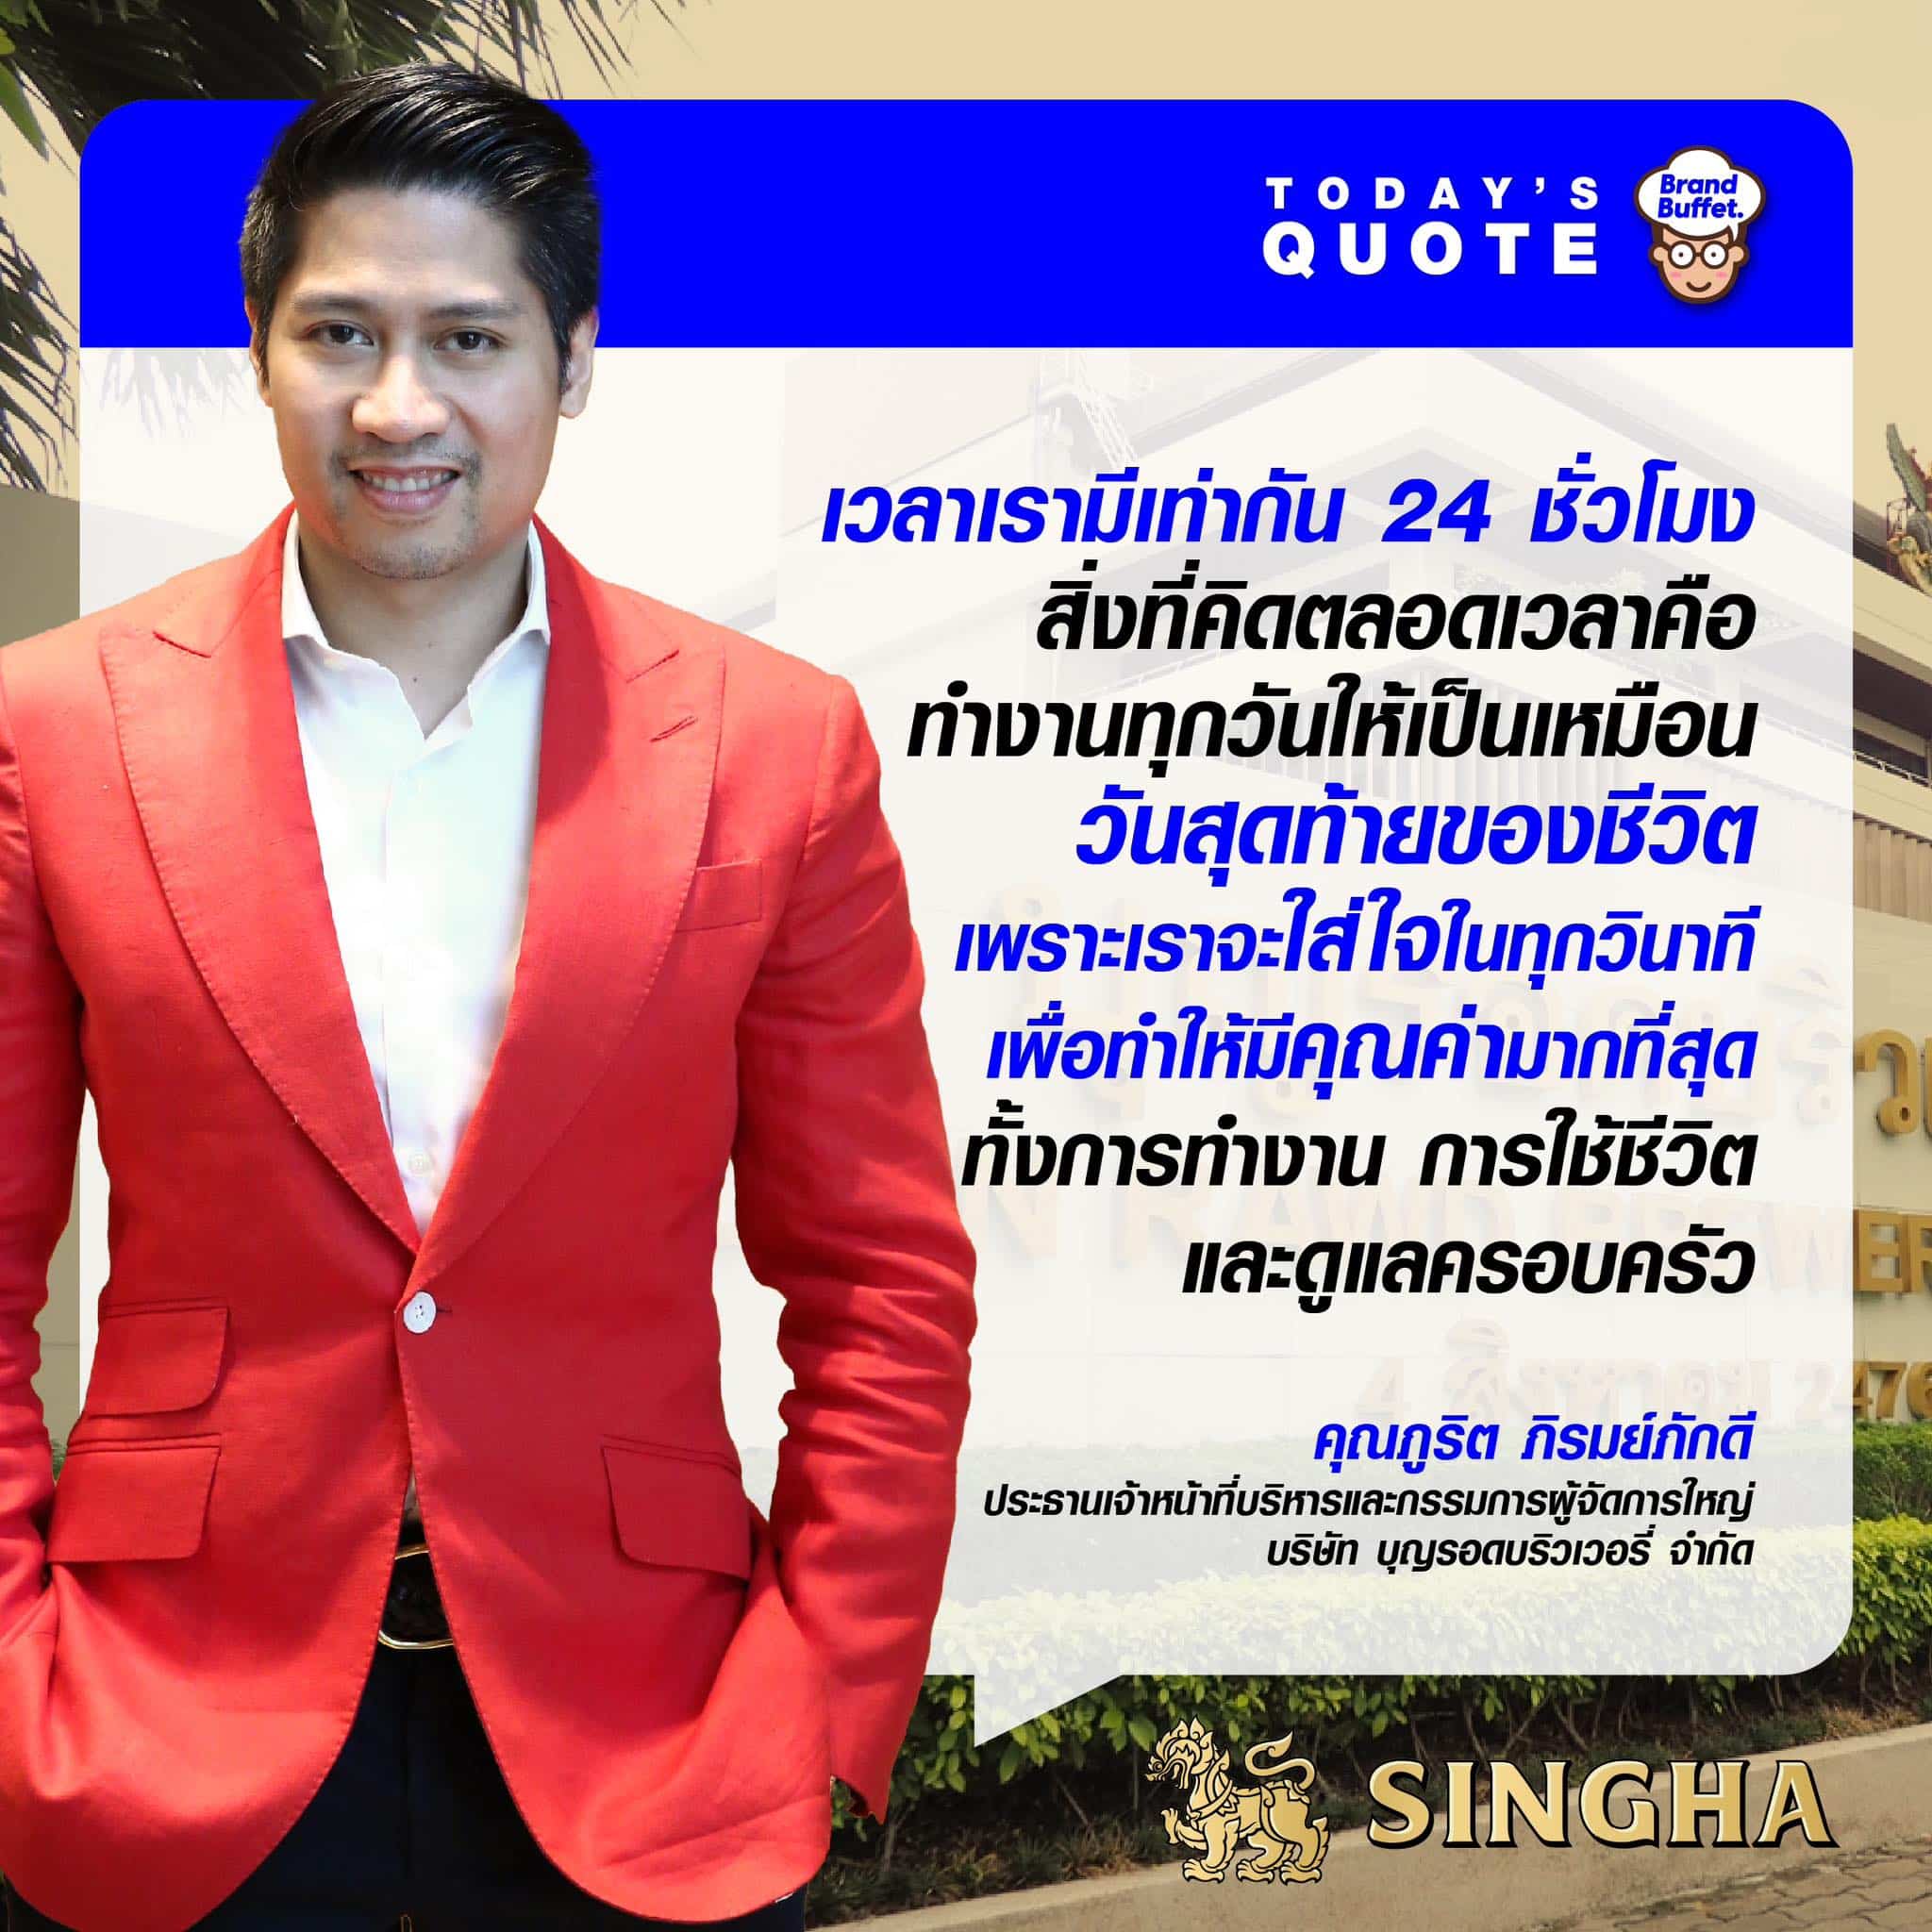 CEO singha Quote